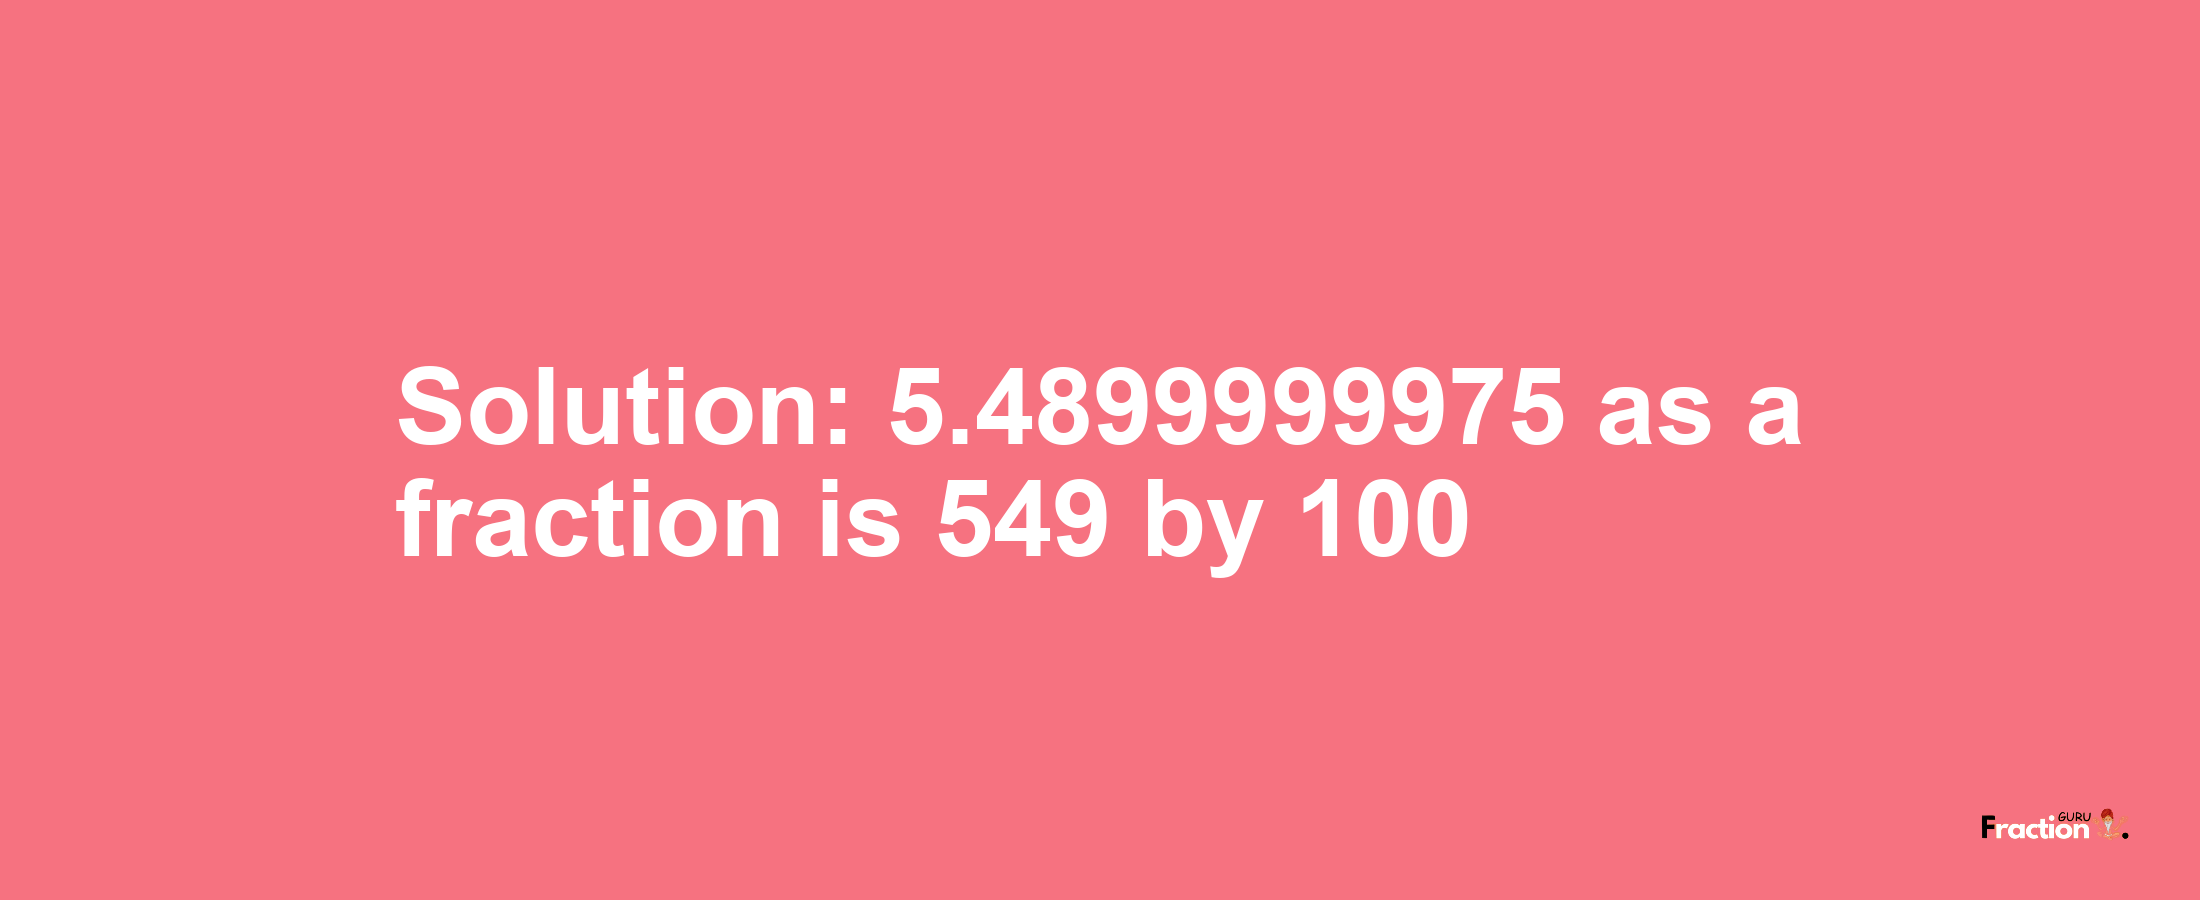 Solution:5.4899999975 as a fraction is 549/100